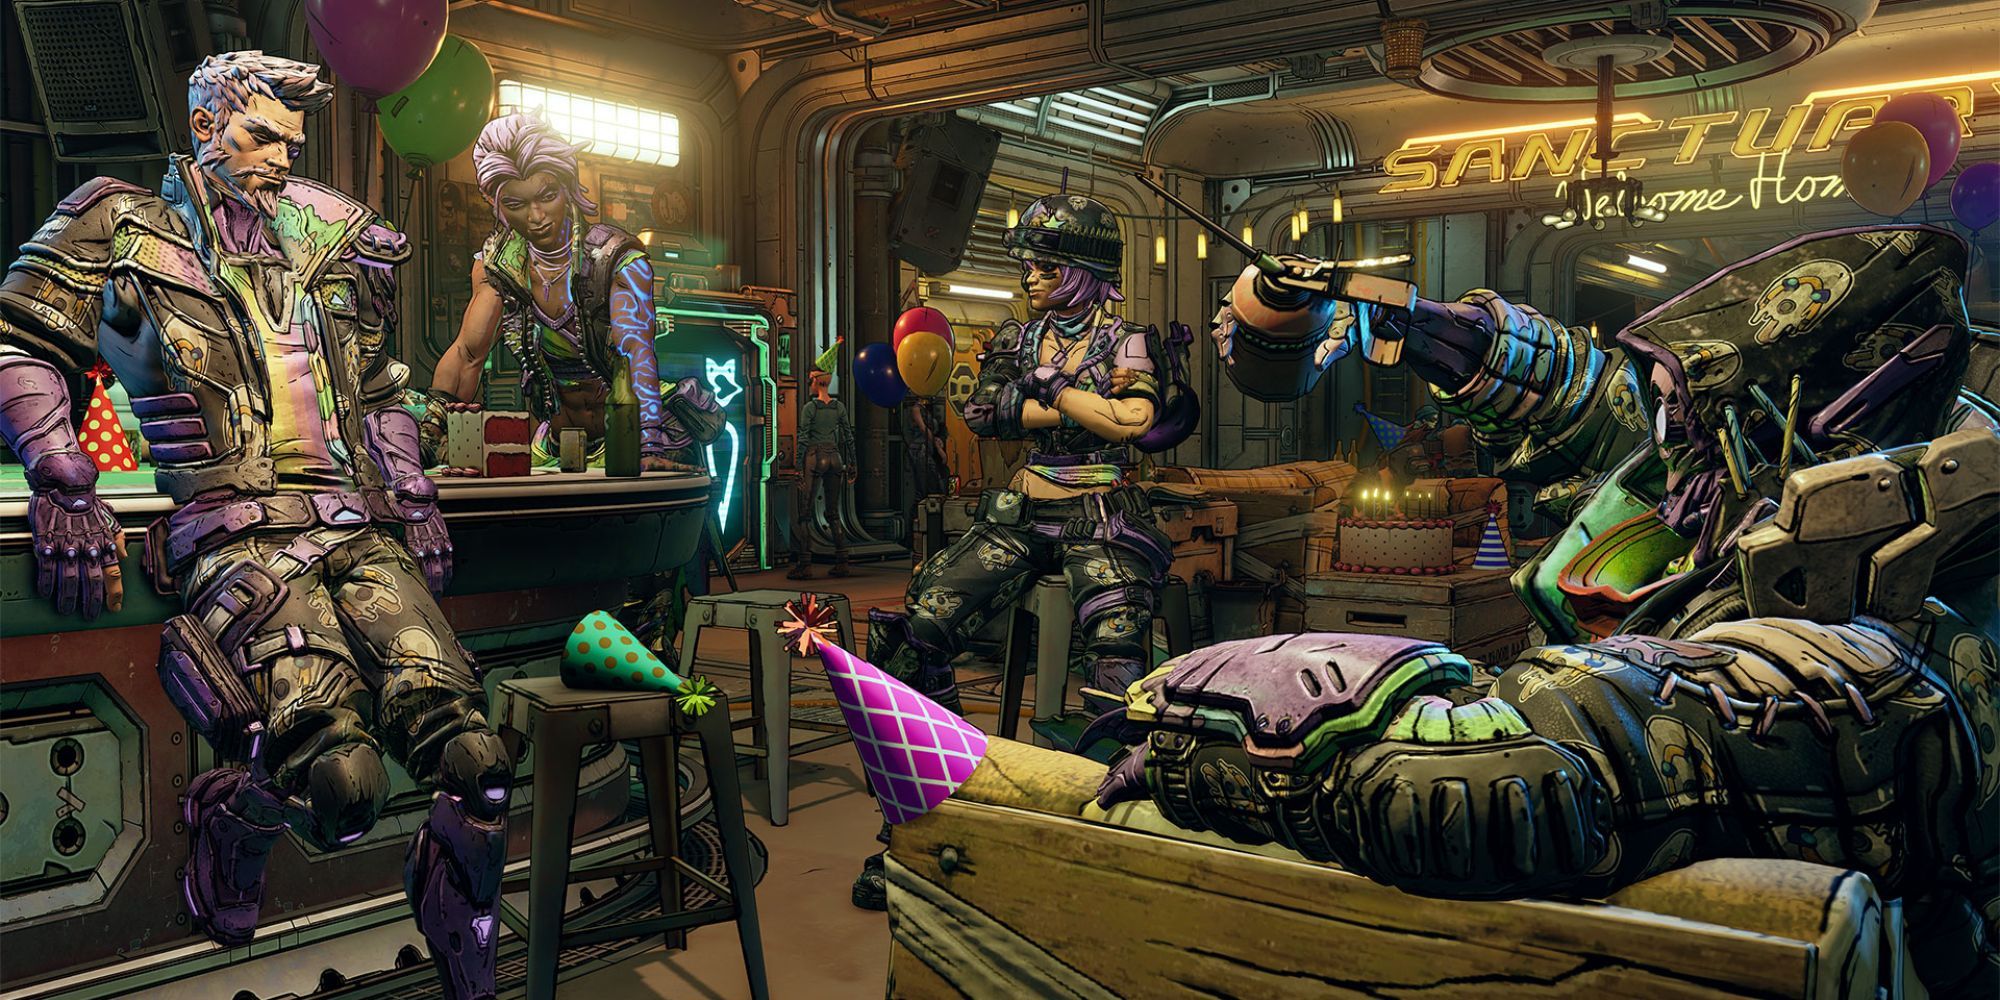 Four characters relaxing together in a room in Borderlands 3